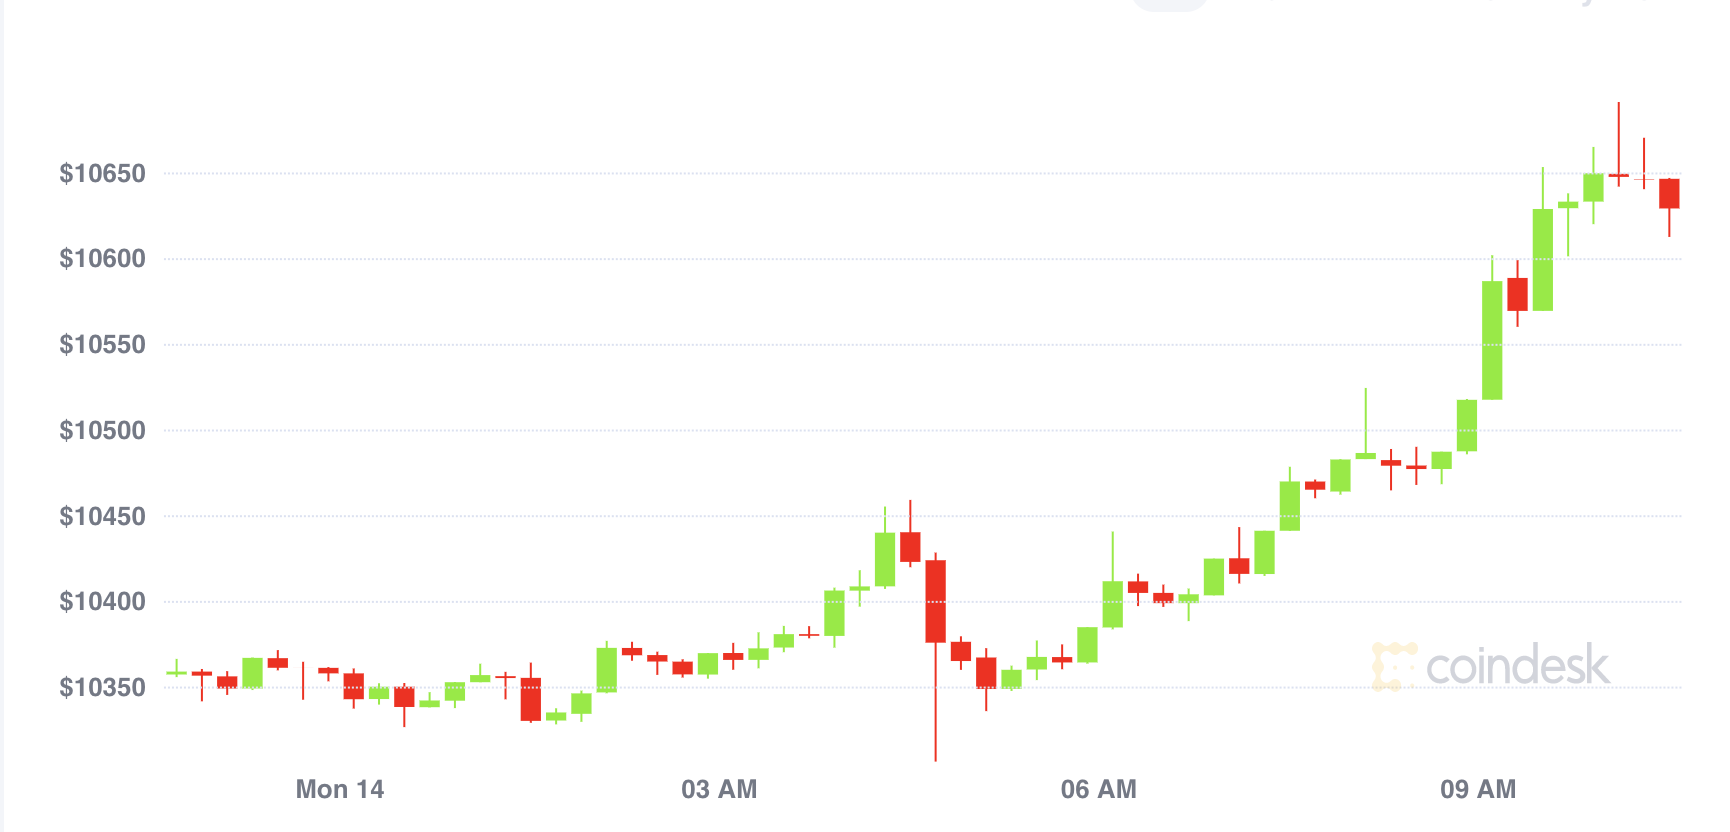 Bitcoin’s-jump-to-$10.7k-ends-10-day-sideways-trend